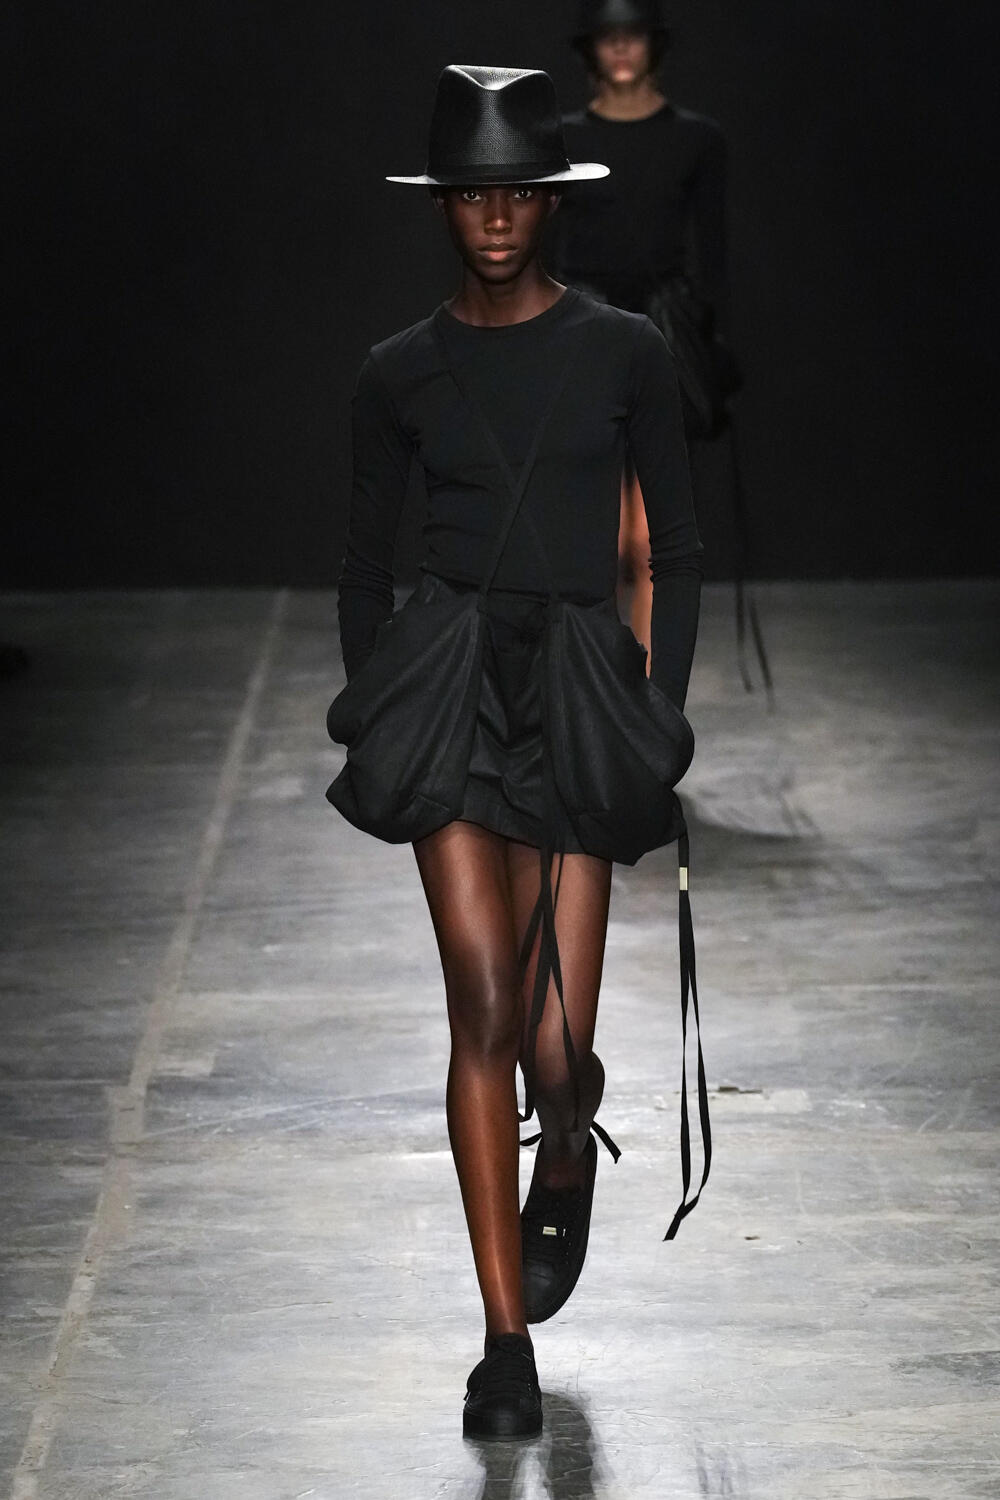 Ann Demeulemeester Spring 2023 Fashion Show | The Impression